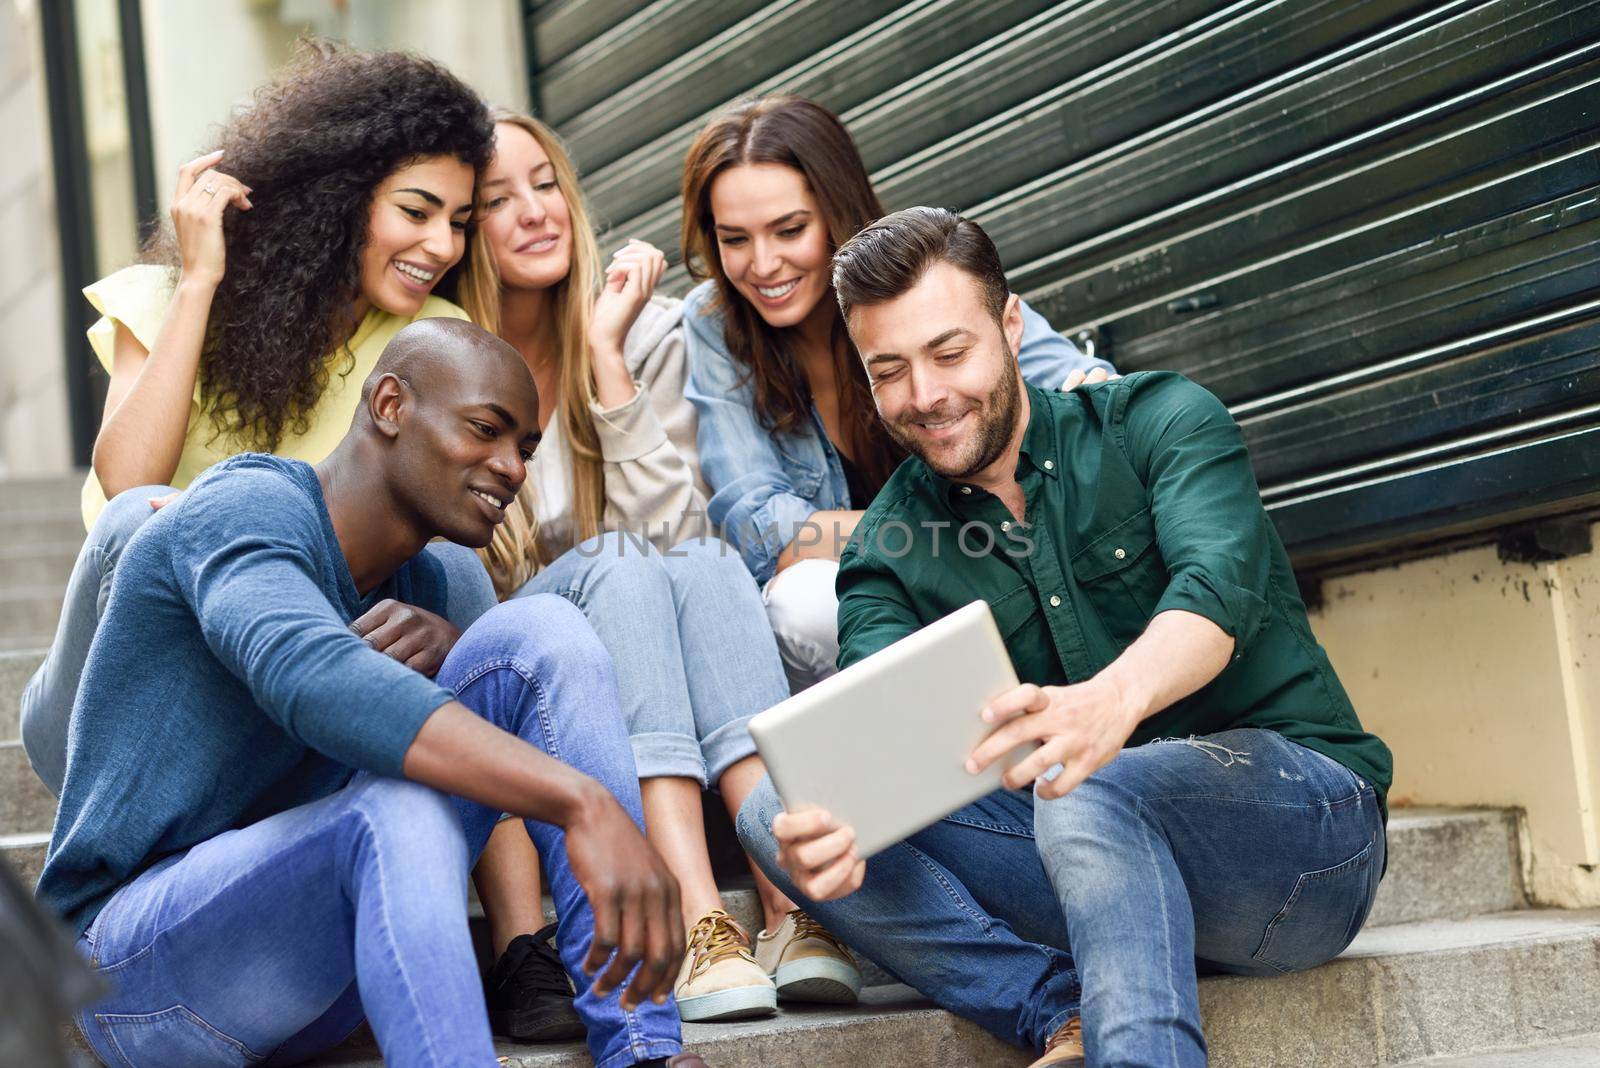 Multi-ethnic group of young people looking at a tablet computer outdoors in urban background. Group of men and woman sitting together on steps.